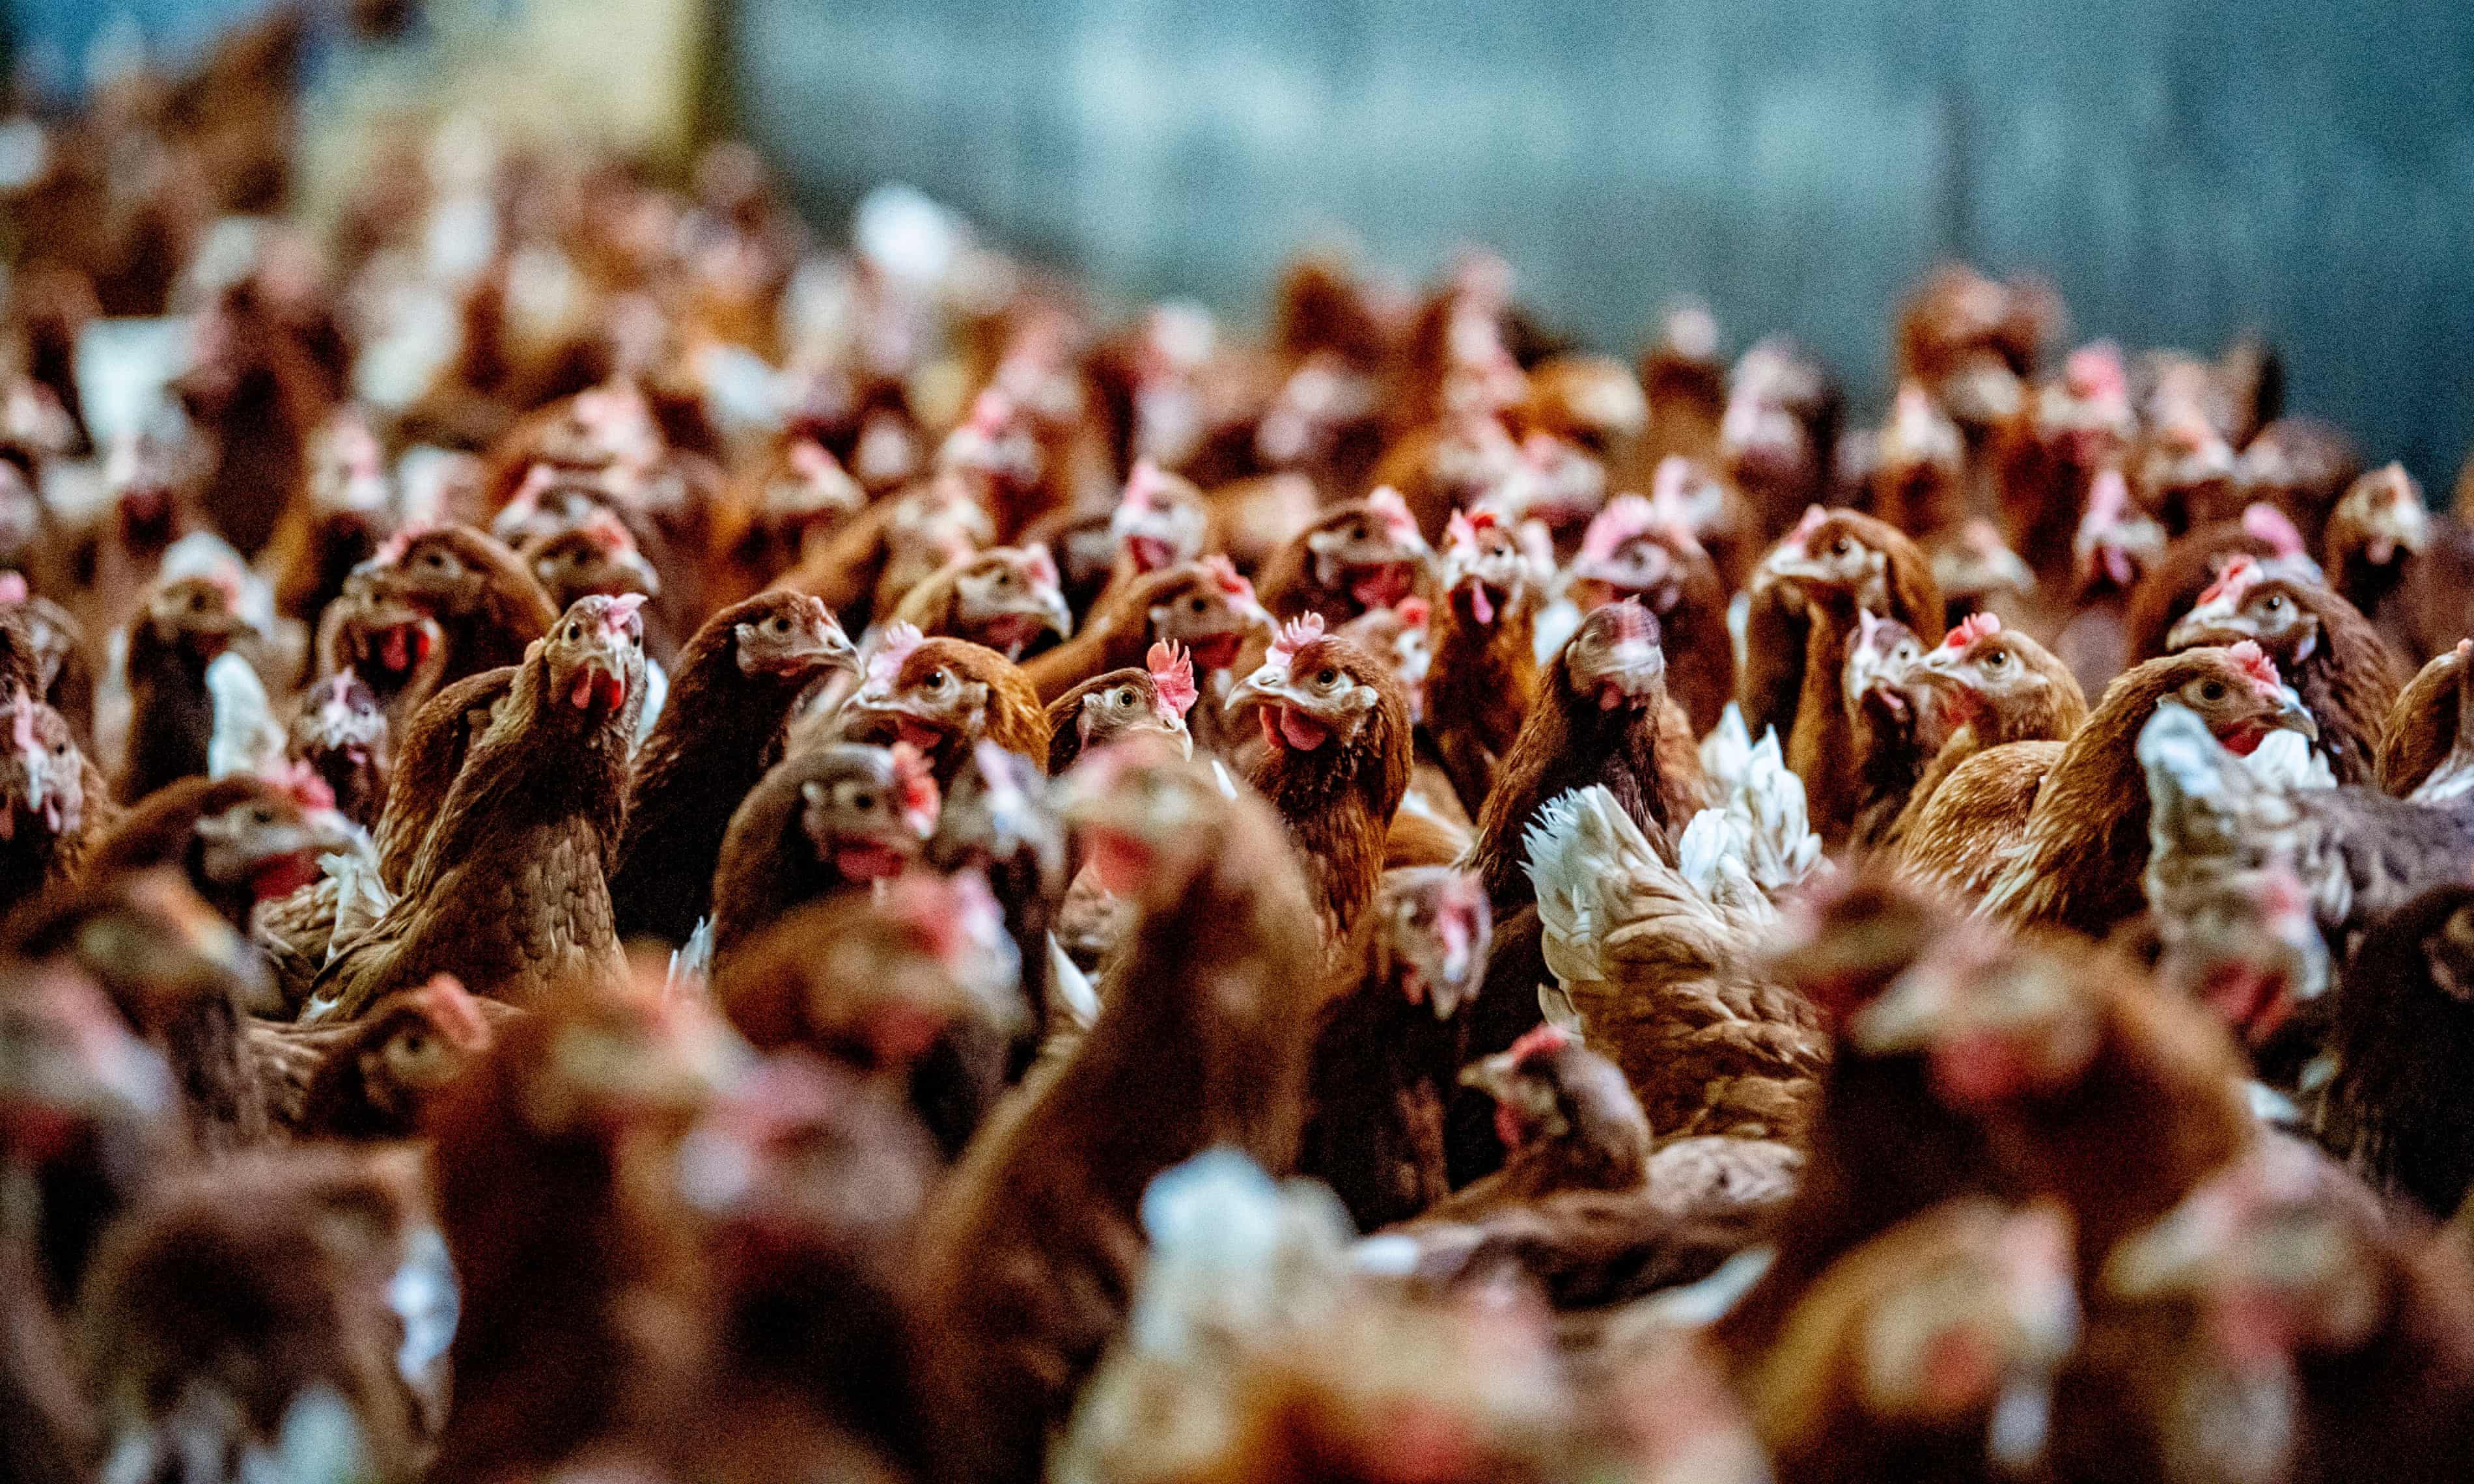 Bird flu detected among chickens in Texas and Michigan (theguardian.com)